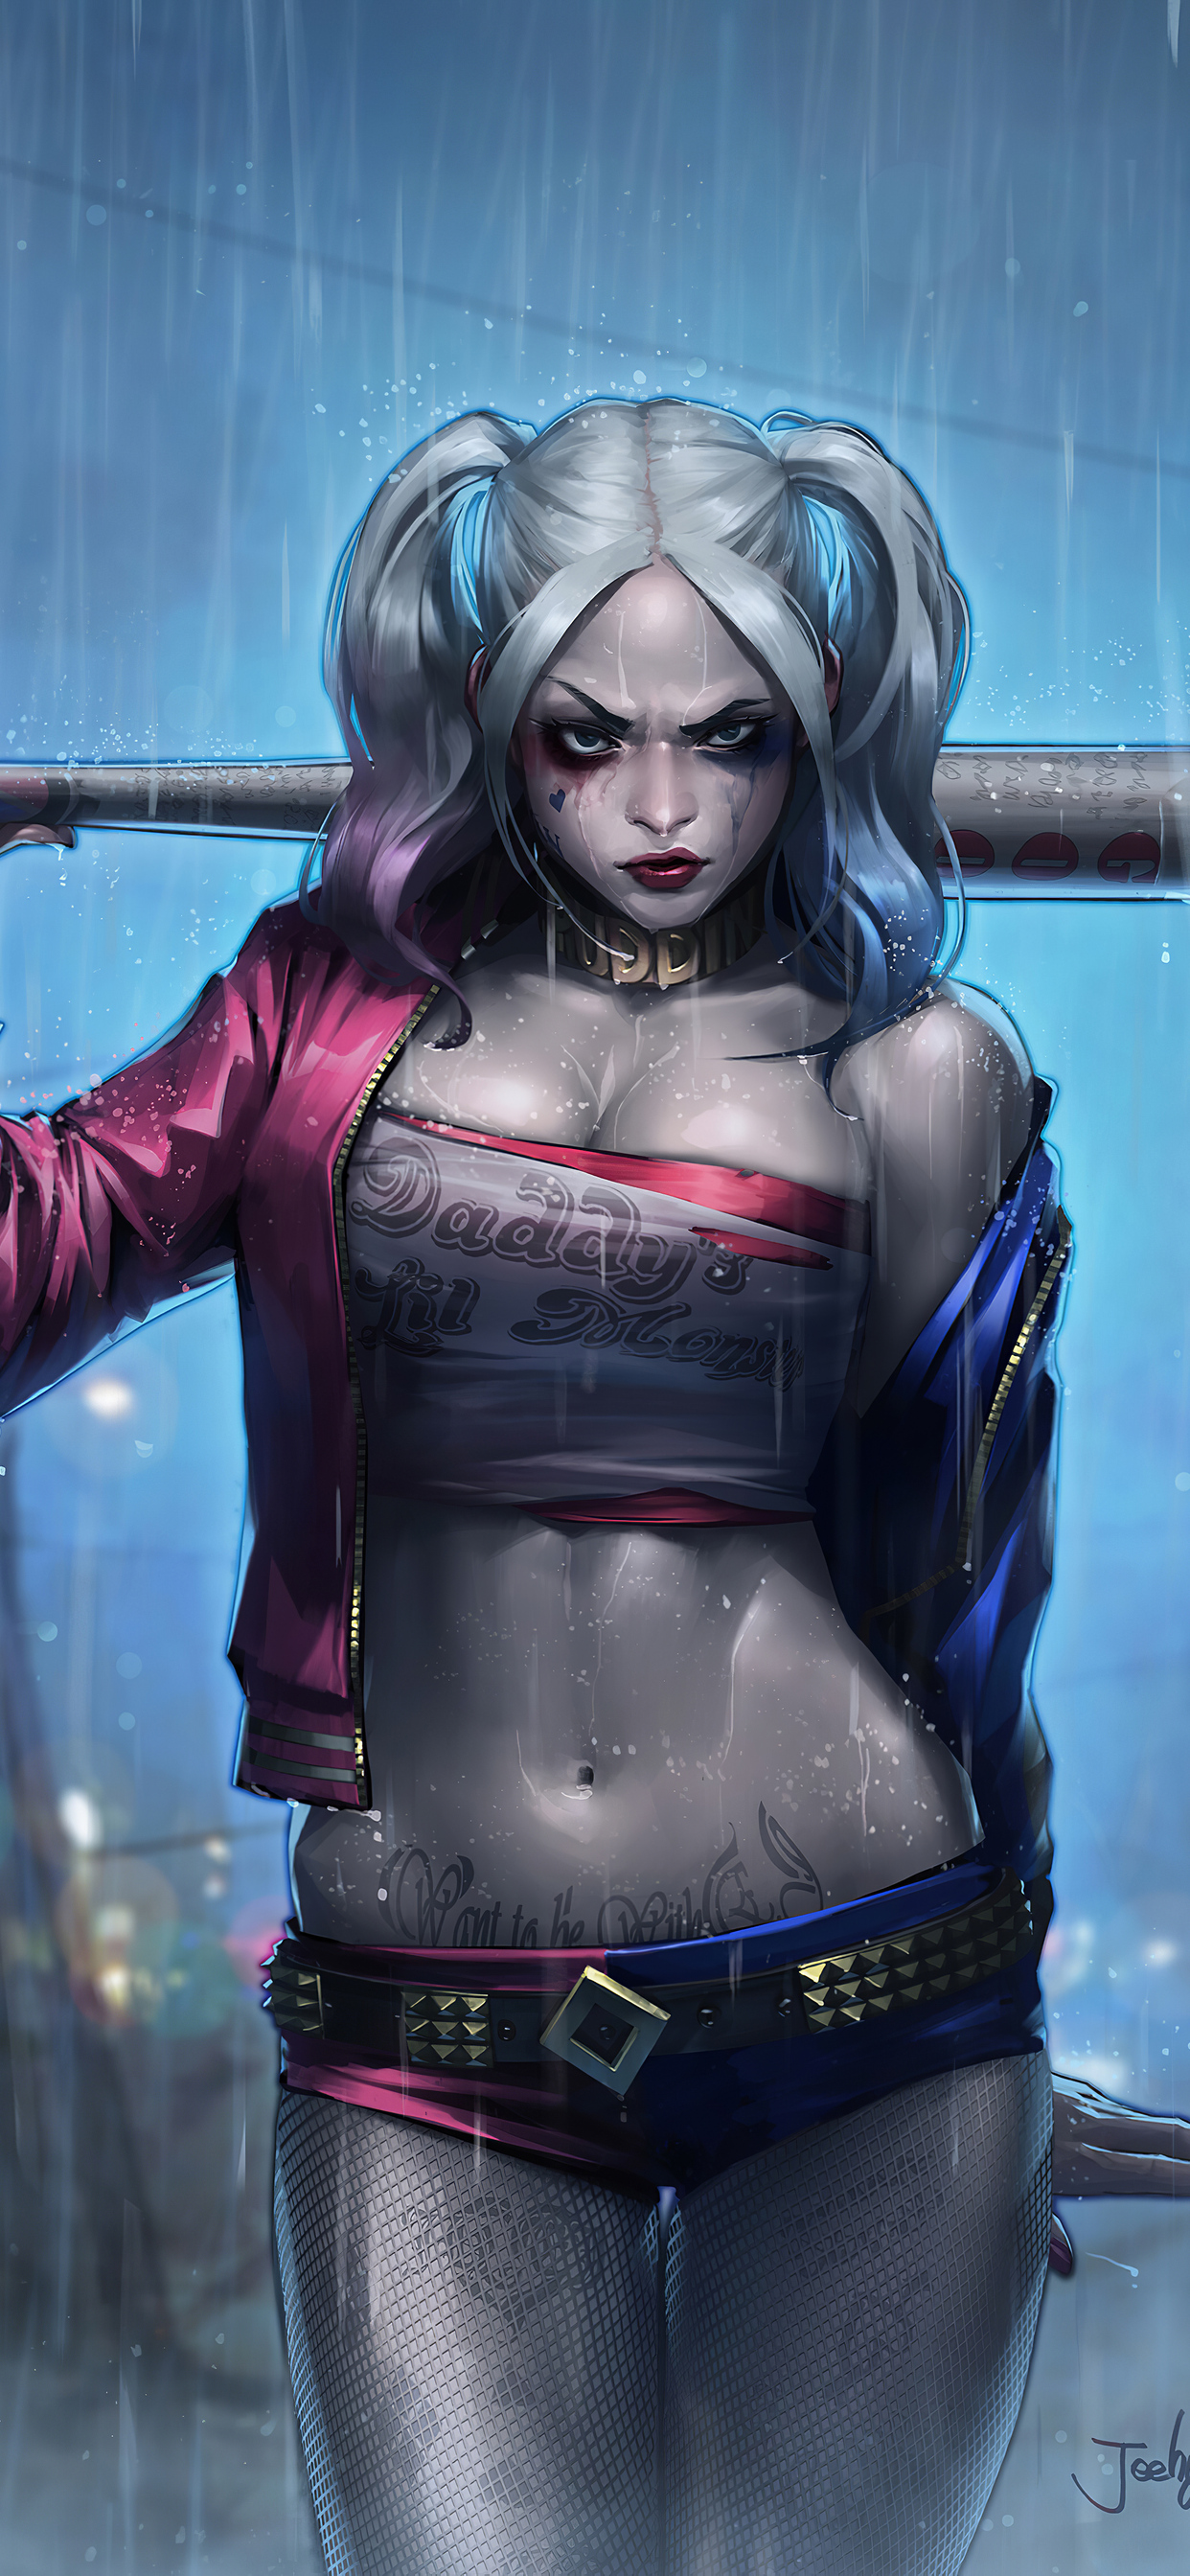 1242x2688 Harley Quinn Pictures iPhone 6 Wallpaper 2020 Симпатичные обои.